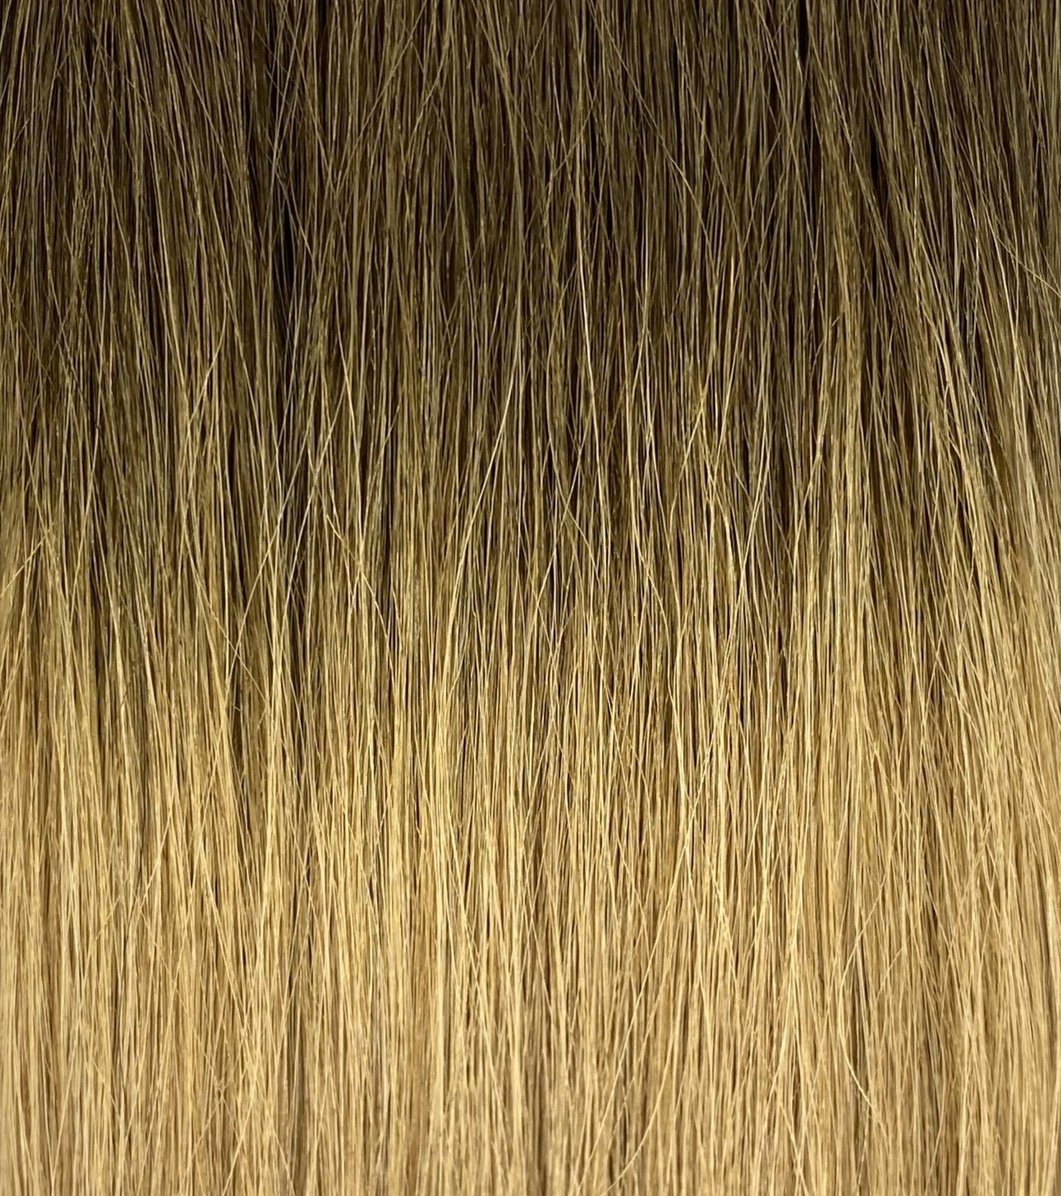 Weft hair extensions #4 & 14 - Single - 20 inches - Chestnut into Copper Golden Light Blonde Ombre Weft DR Hair Products Co 